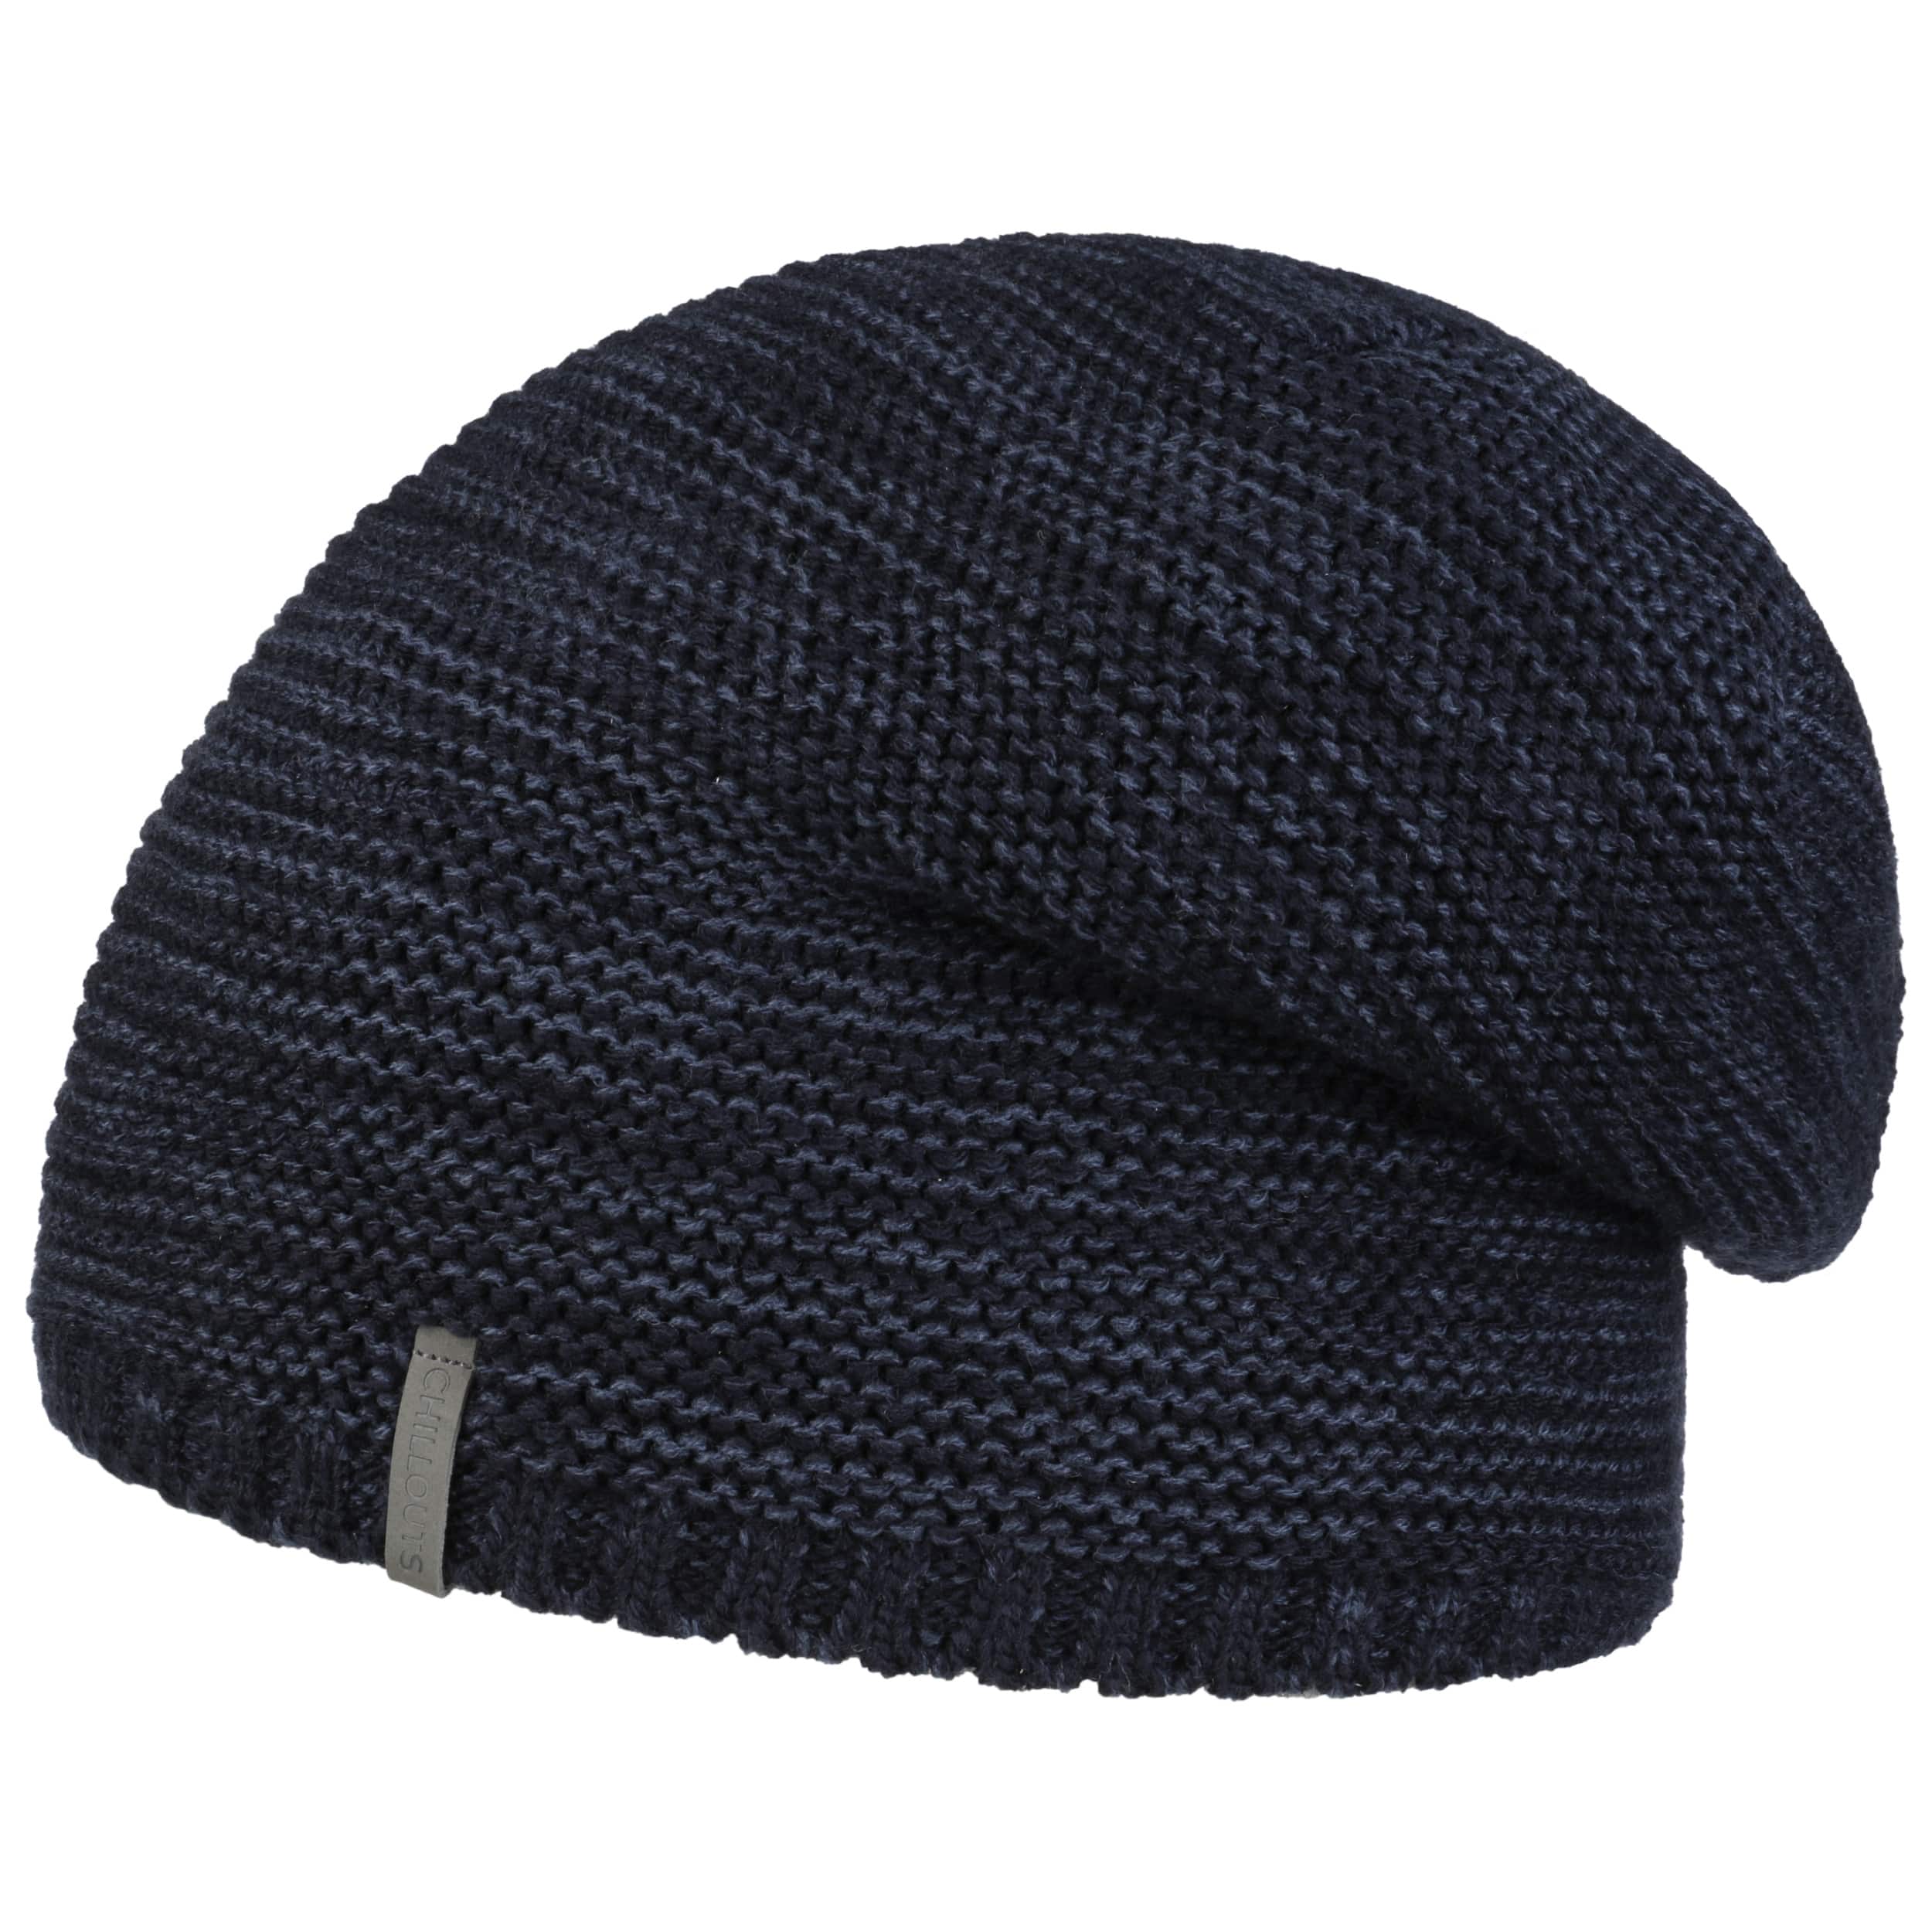 Beanie 37,95 by € Chillouts - Hat Keith